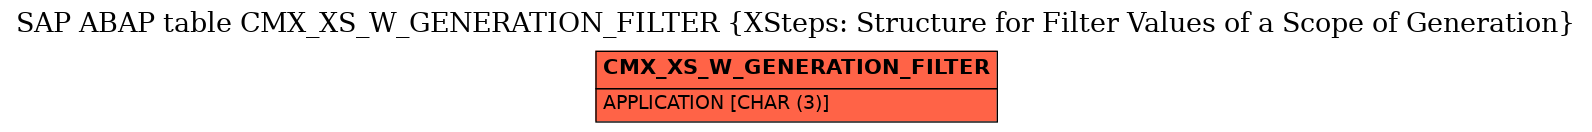 E-R Diagram for table CMX_XS_W_GENERATION_FILTER (XSteps: Structure for Filter Values of a Scope of Generation)